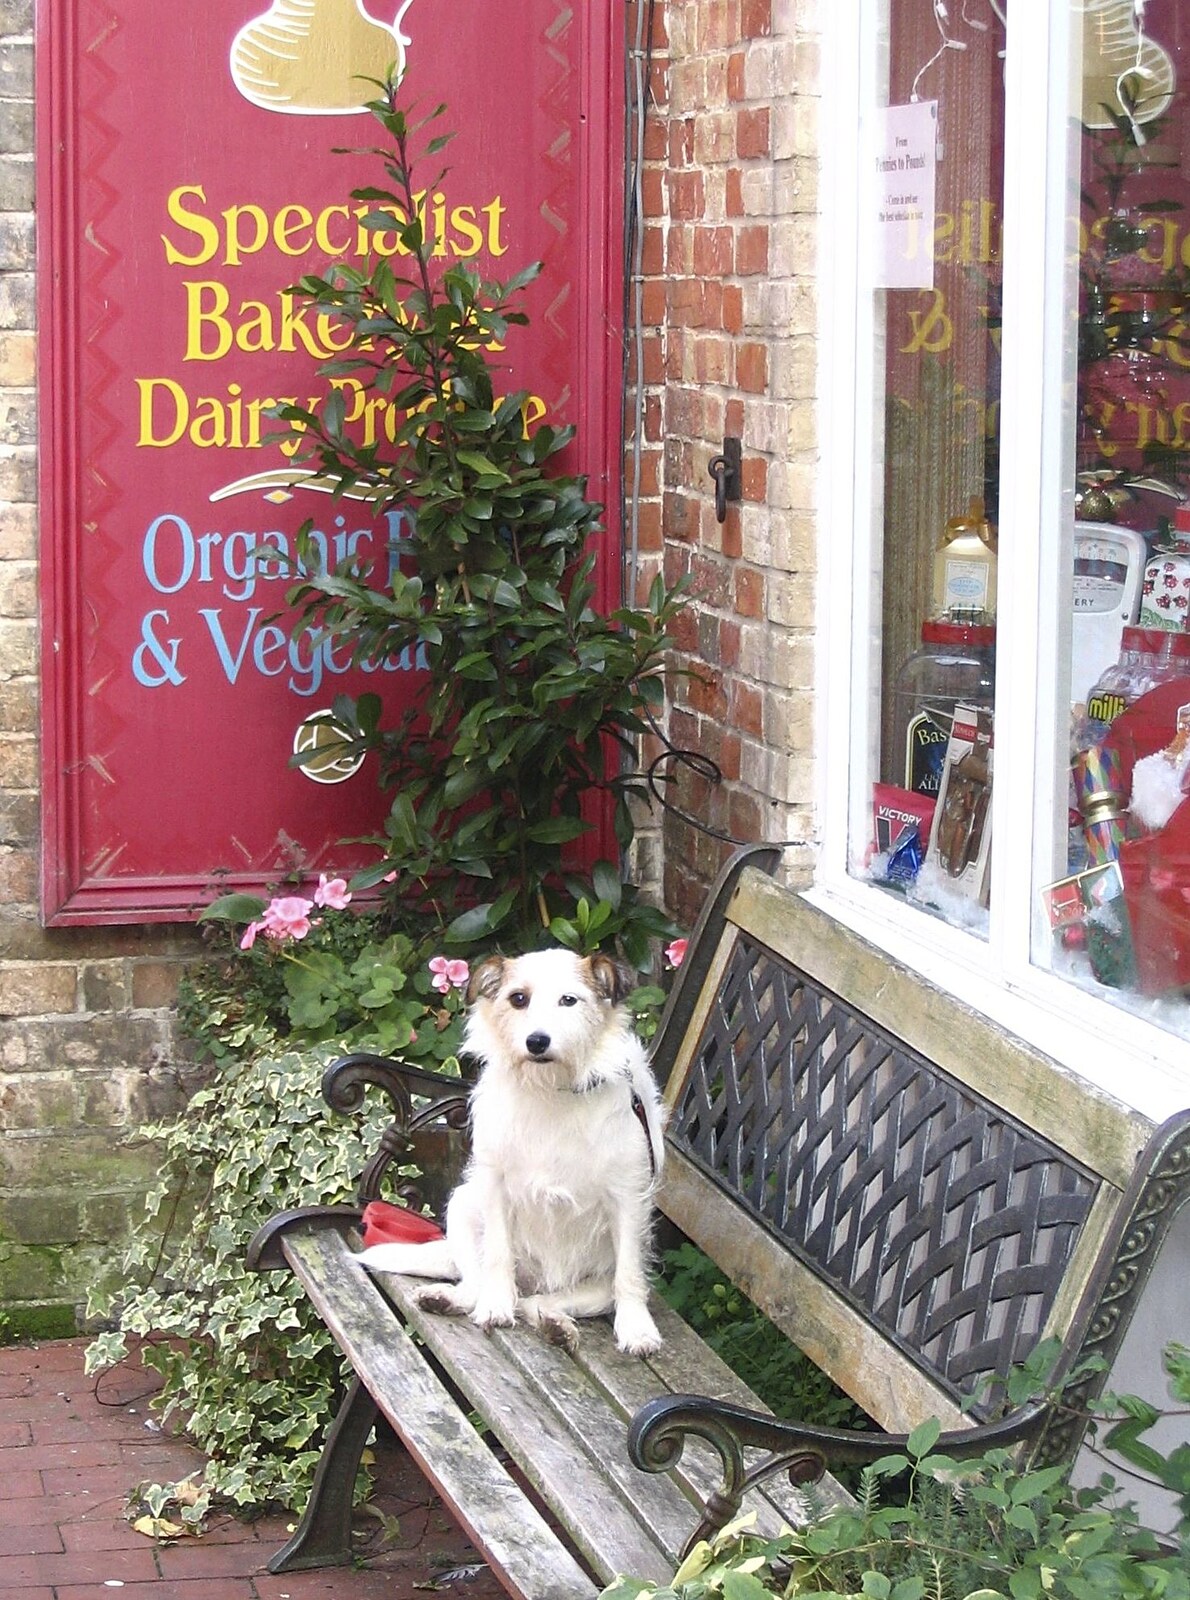 A small dog waits outside the sweet shop from Feeding the Ducks: a Diss and Norwich Miscellany - 7th November 2004